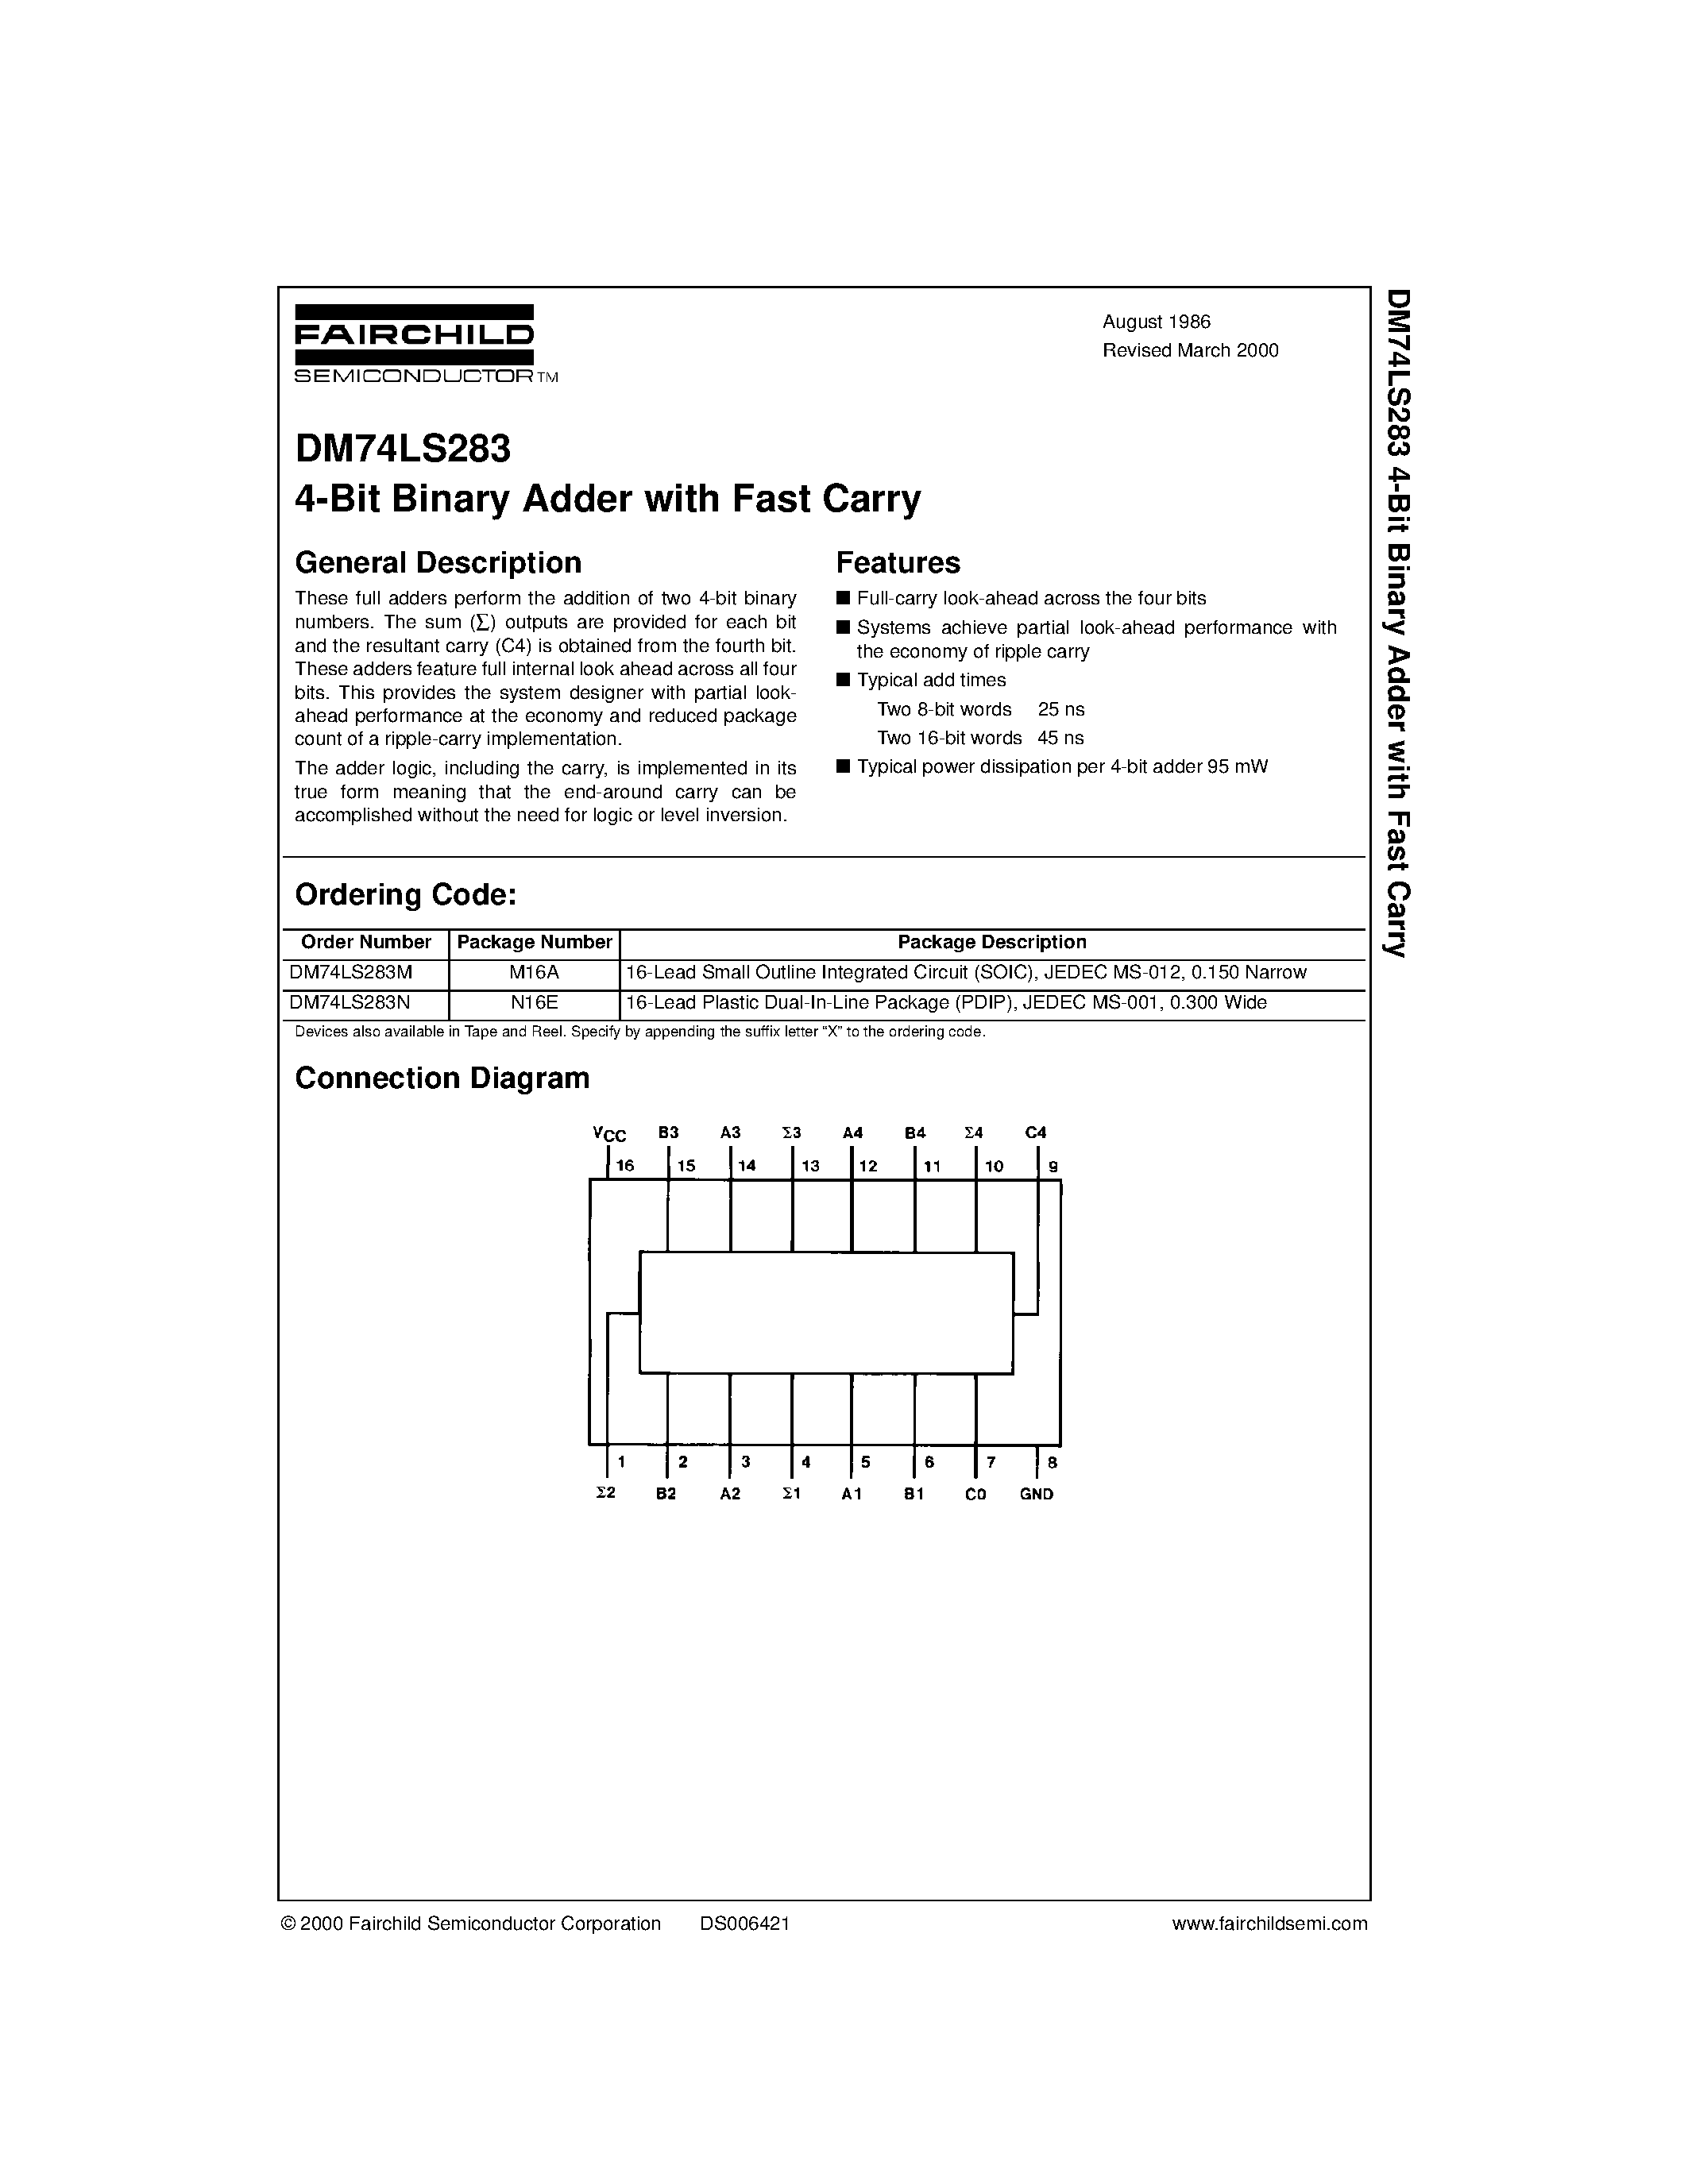 Datasheet 74283 - 4-Bit Binary Adder with Fast Carry page 1